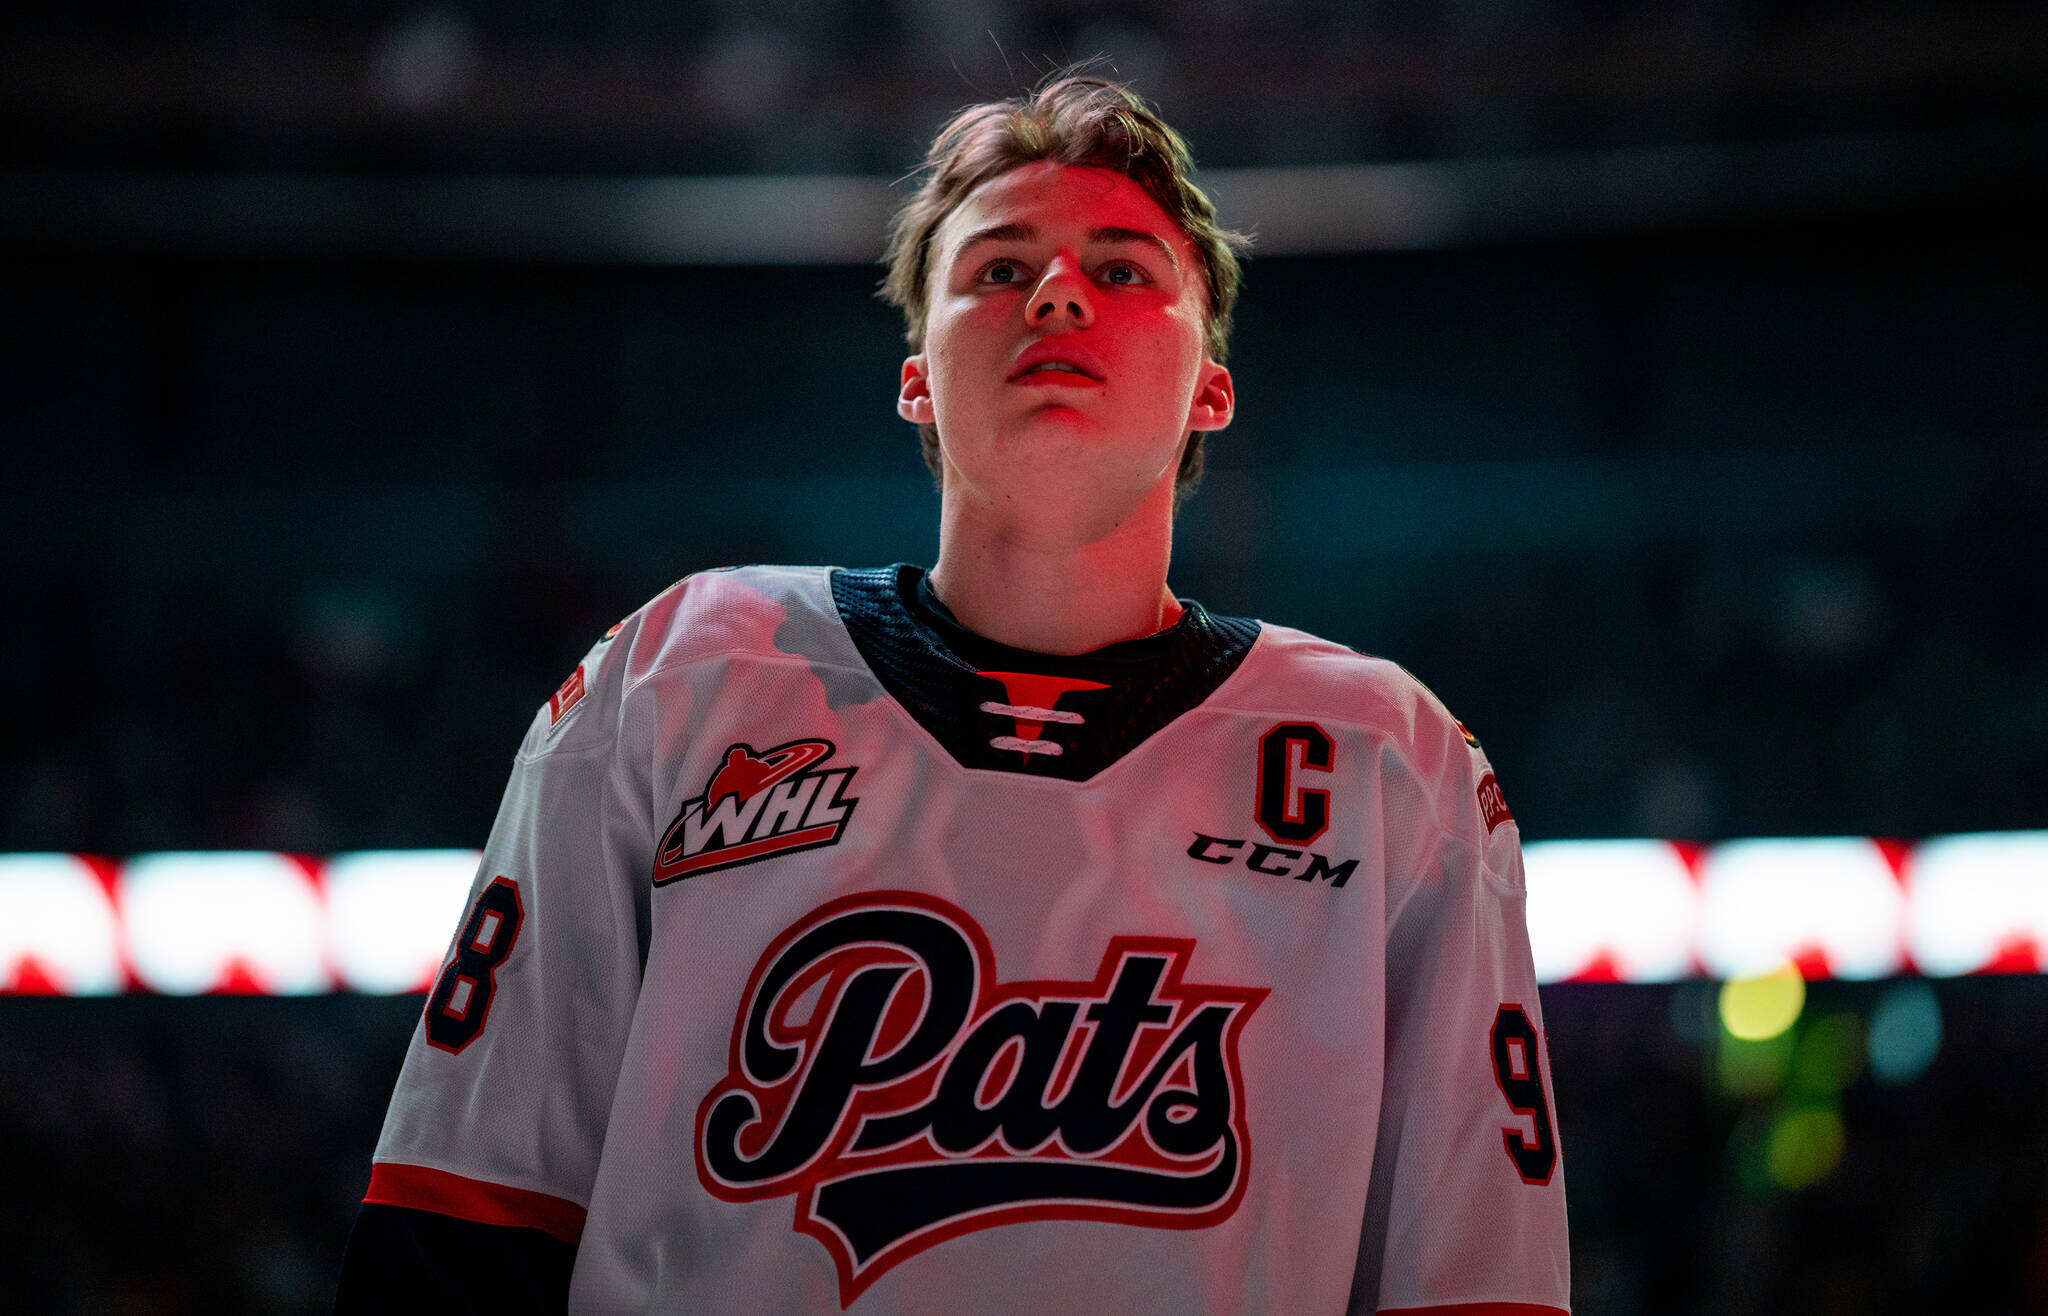 Regina Pats forward Connor Bedard (98) lines up prior to WHL playoff hockey action against the Saskatoon Blades in Saskatoon, Sask., on Friday, March 31, 2023. THE CANADIAN PRESS/Heywood Yu